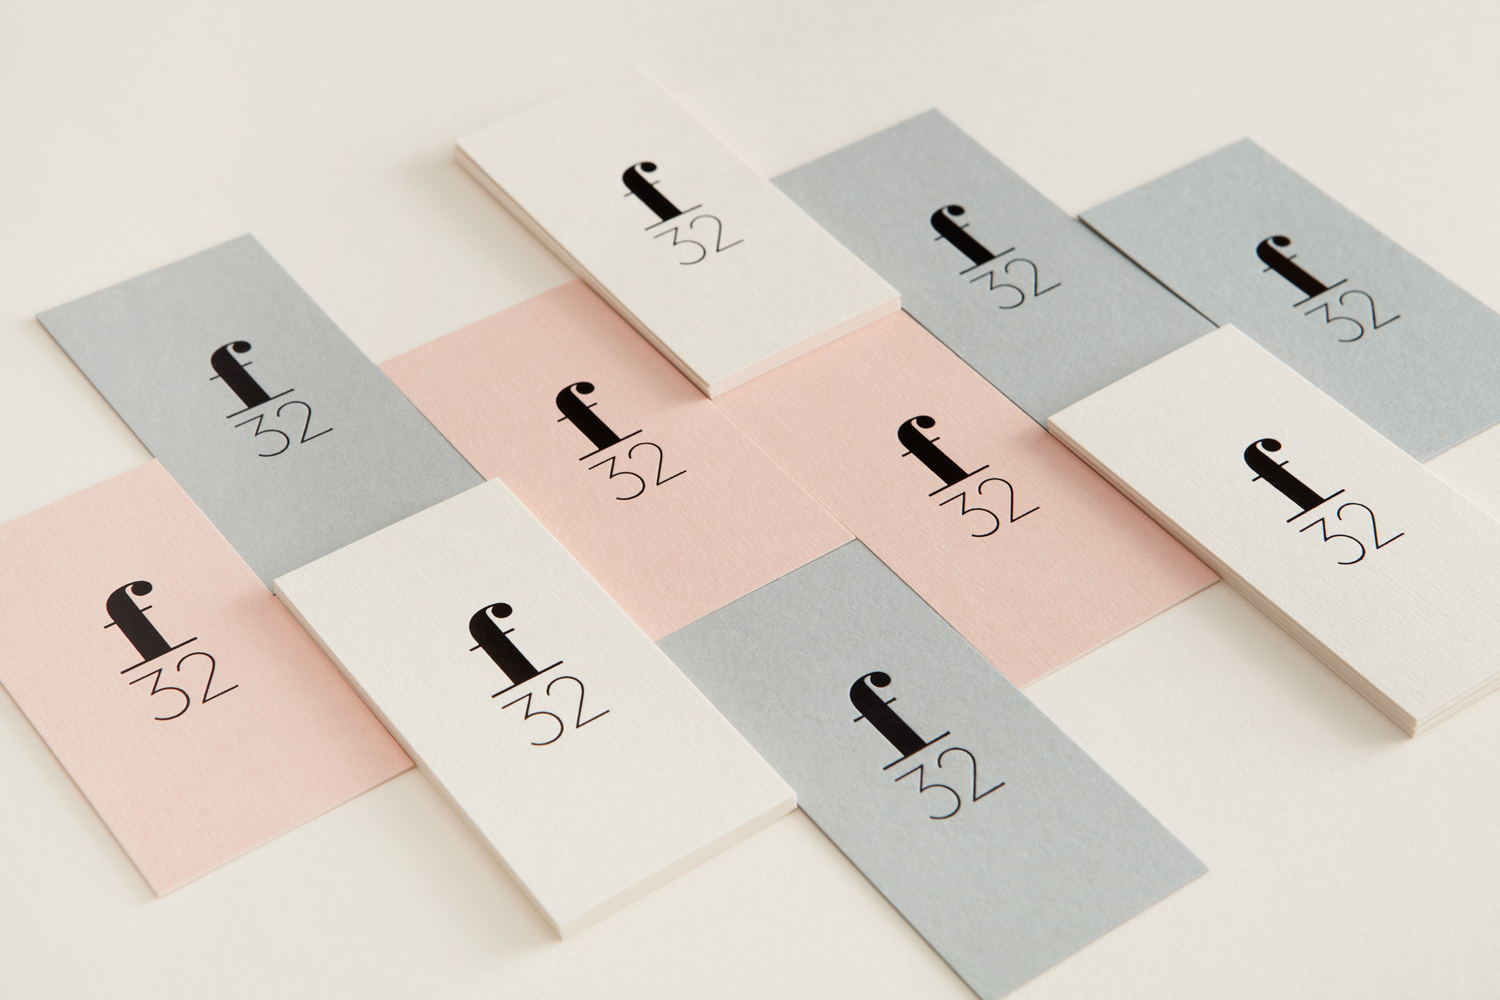 Pastel coloured and black block foiled business cards for trend watching company f32 designed by Blok